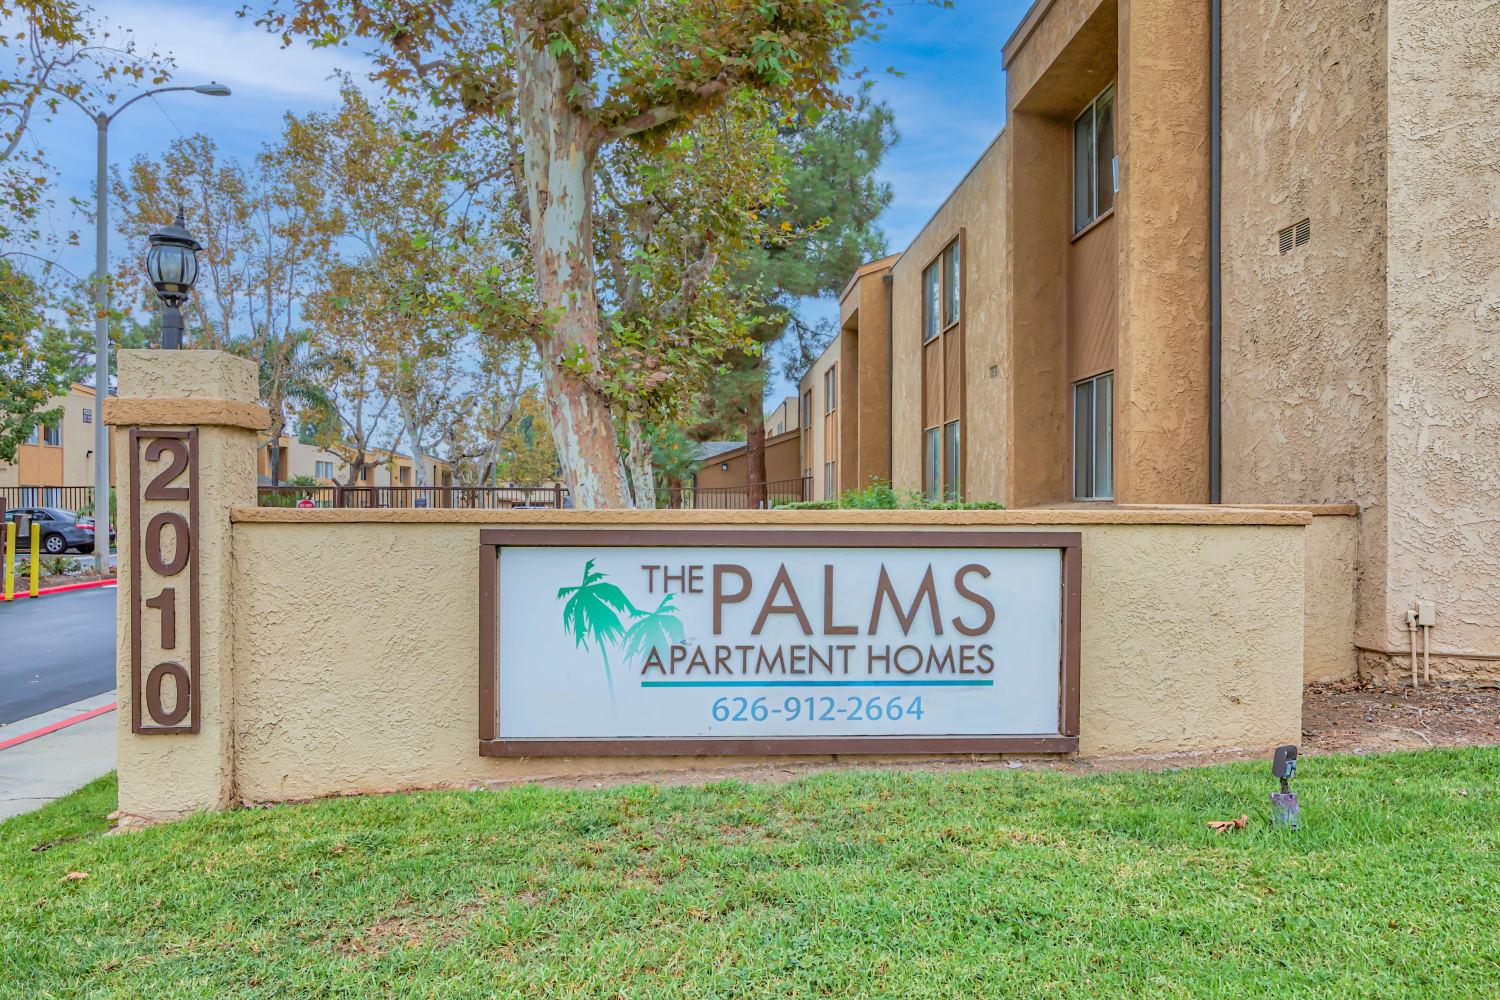 The Palms Apartments apartment homes in Rowland Heights, California